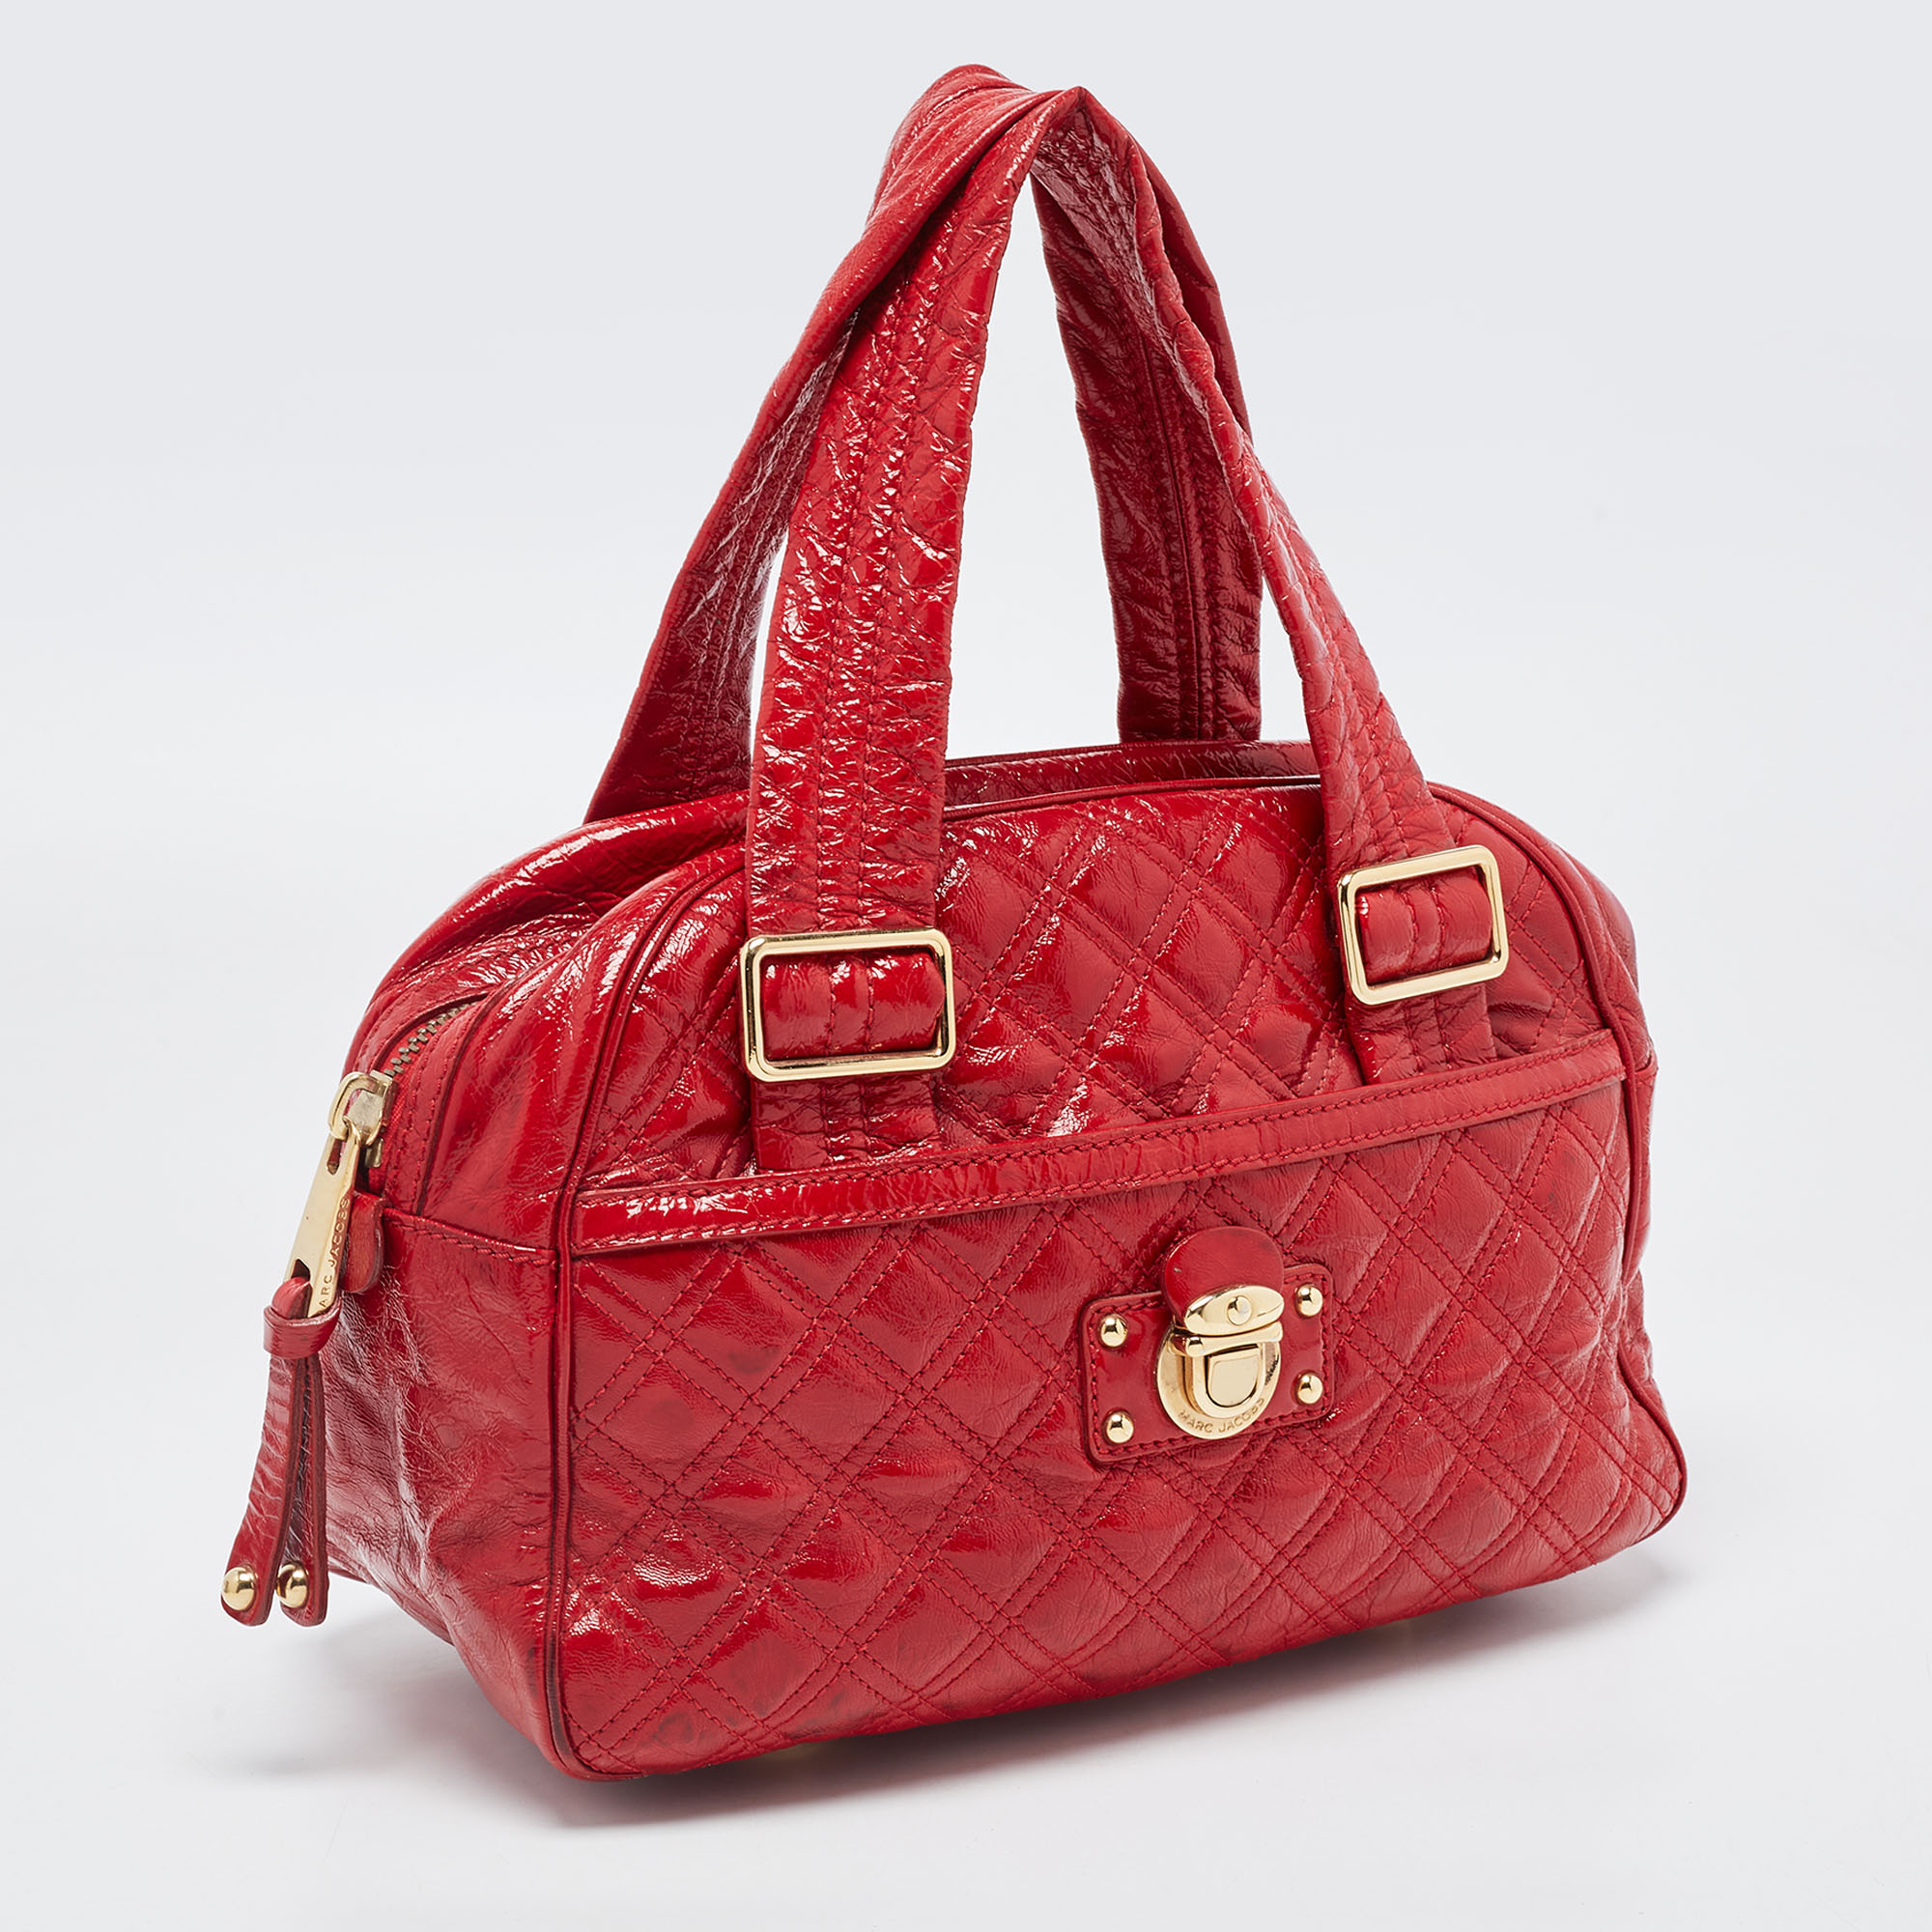 Marc Jacobs Red Quilted Patent Leather Ursula Satchel